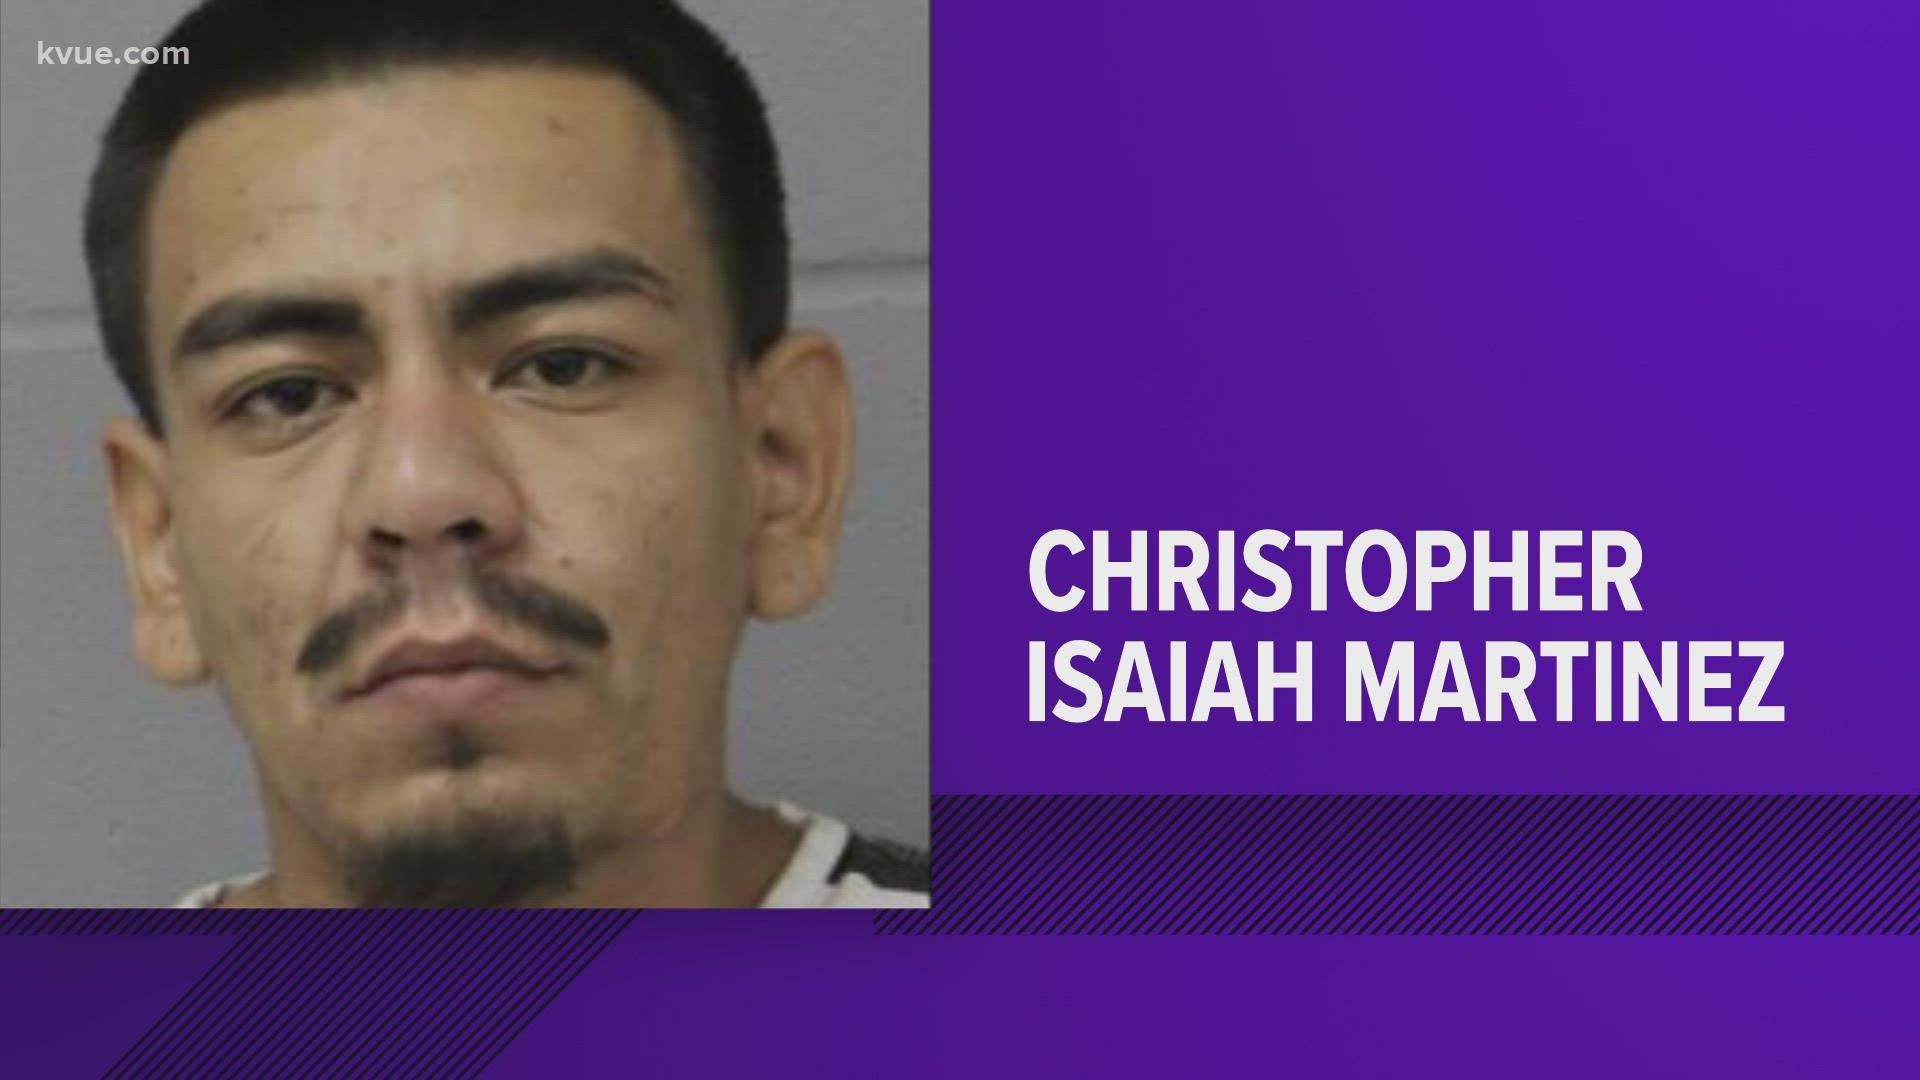 Police are currently seeking Christopher Isaiah Martinez in connection to a murder in Manor.